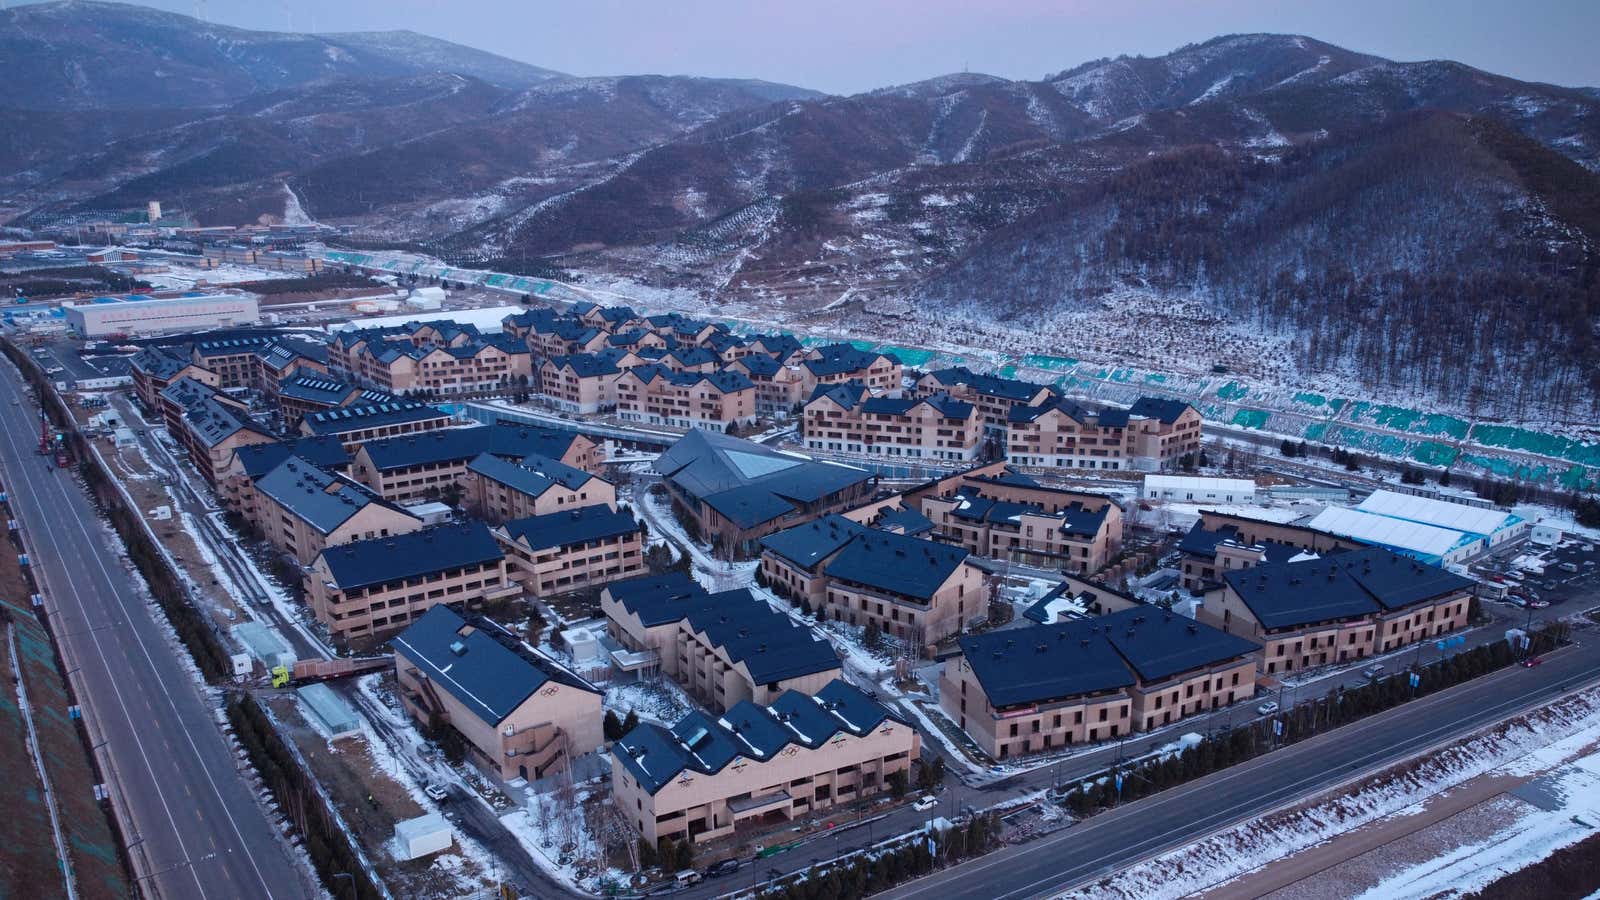 The Zhangjiakou Winter Olympic Village at the 2022 games.